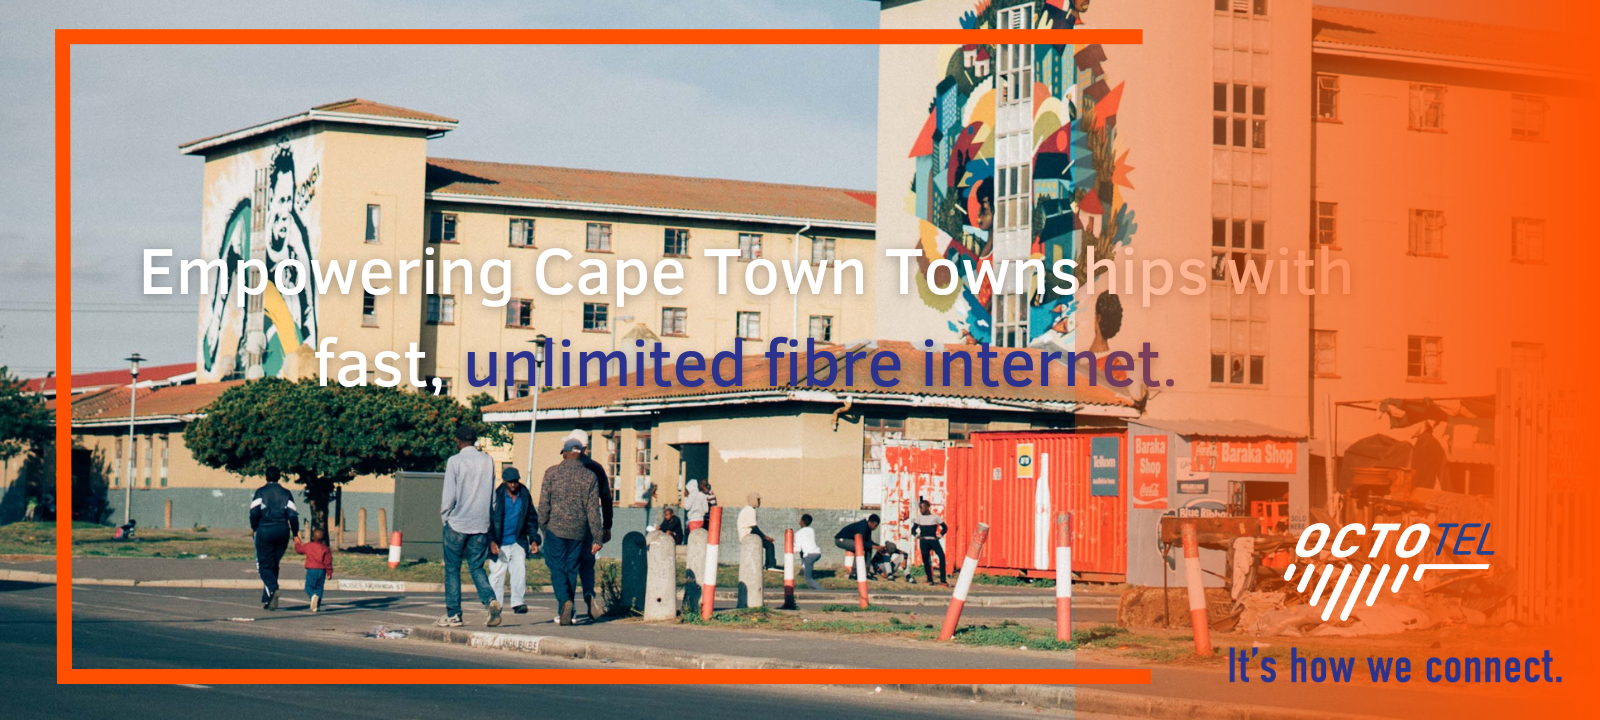 Octotel Bridging The Digital Divide in Cape Town Townships with Fibre Internet Connectivity.